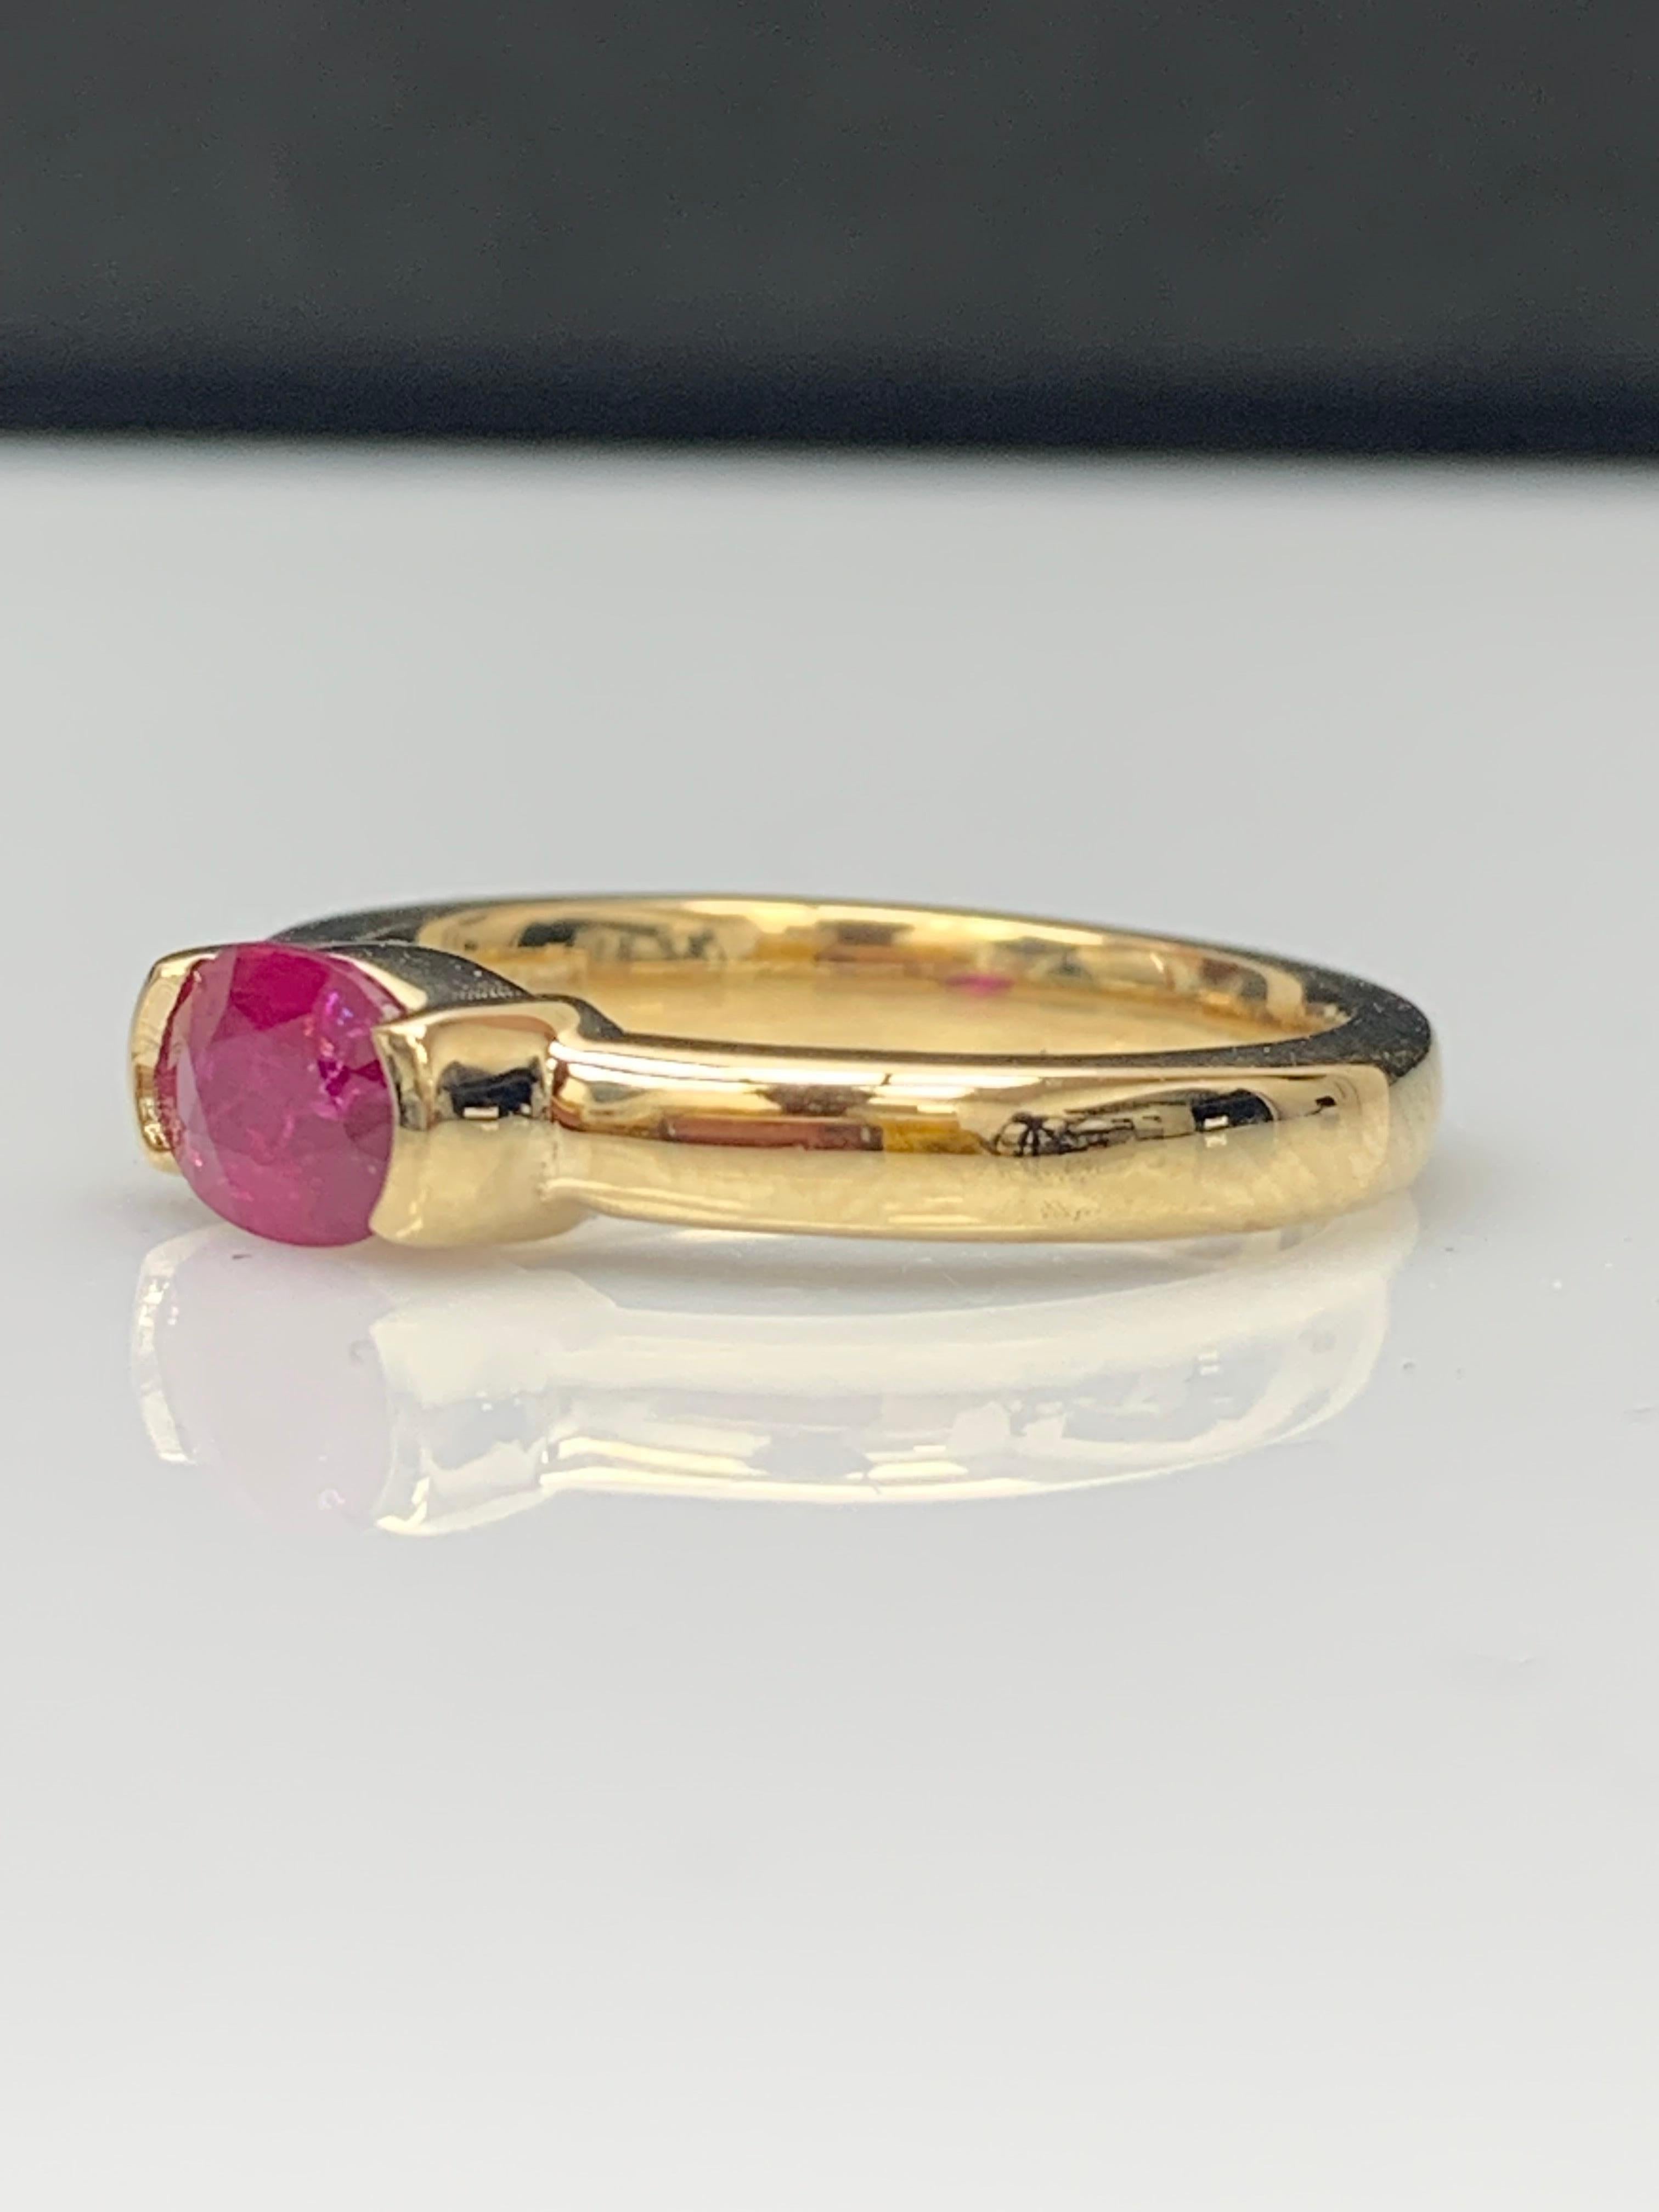 0.78 Carat Oval Cut Ruby Band Ring in 14K Yellow Gold For Sale 6